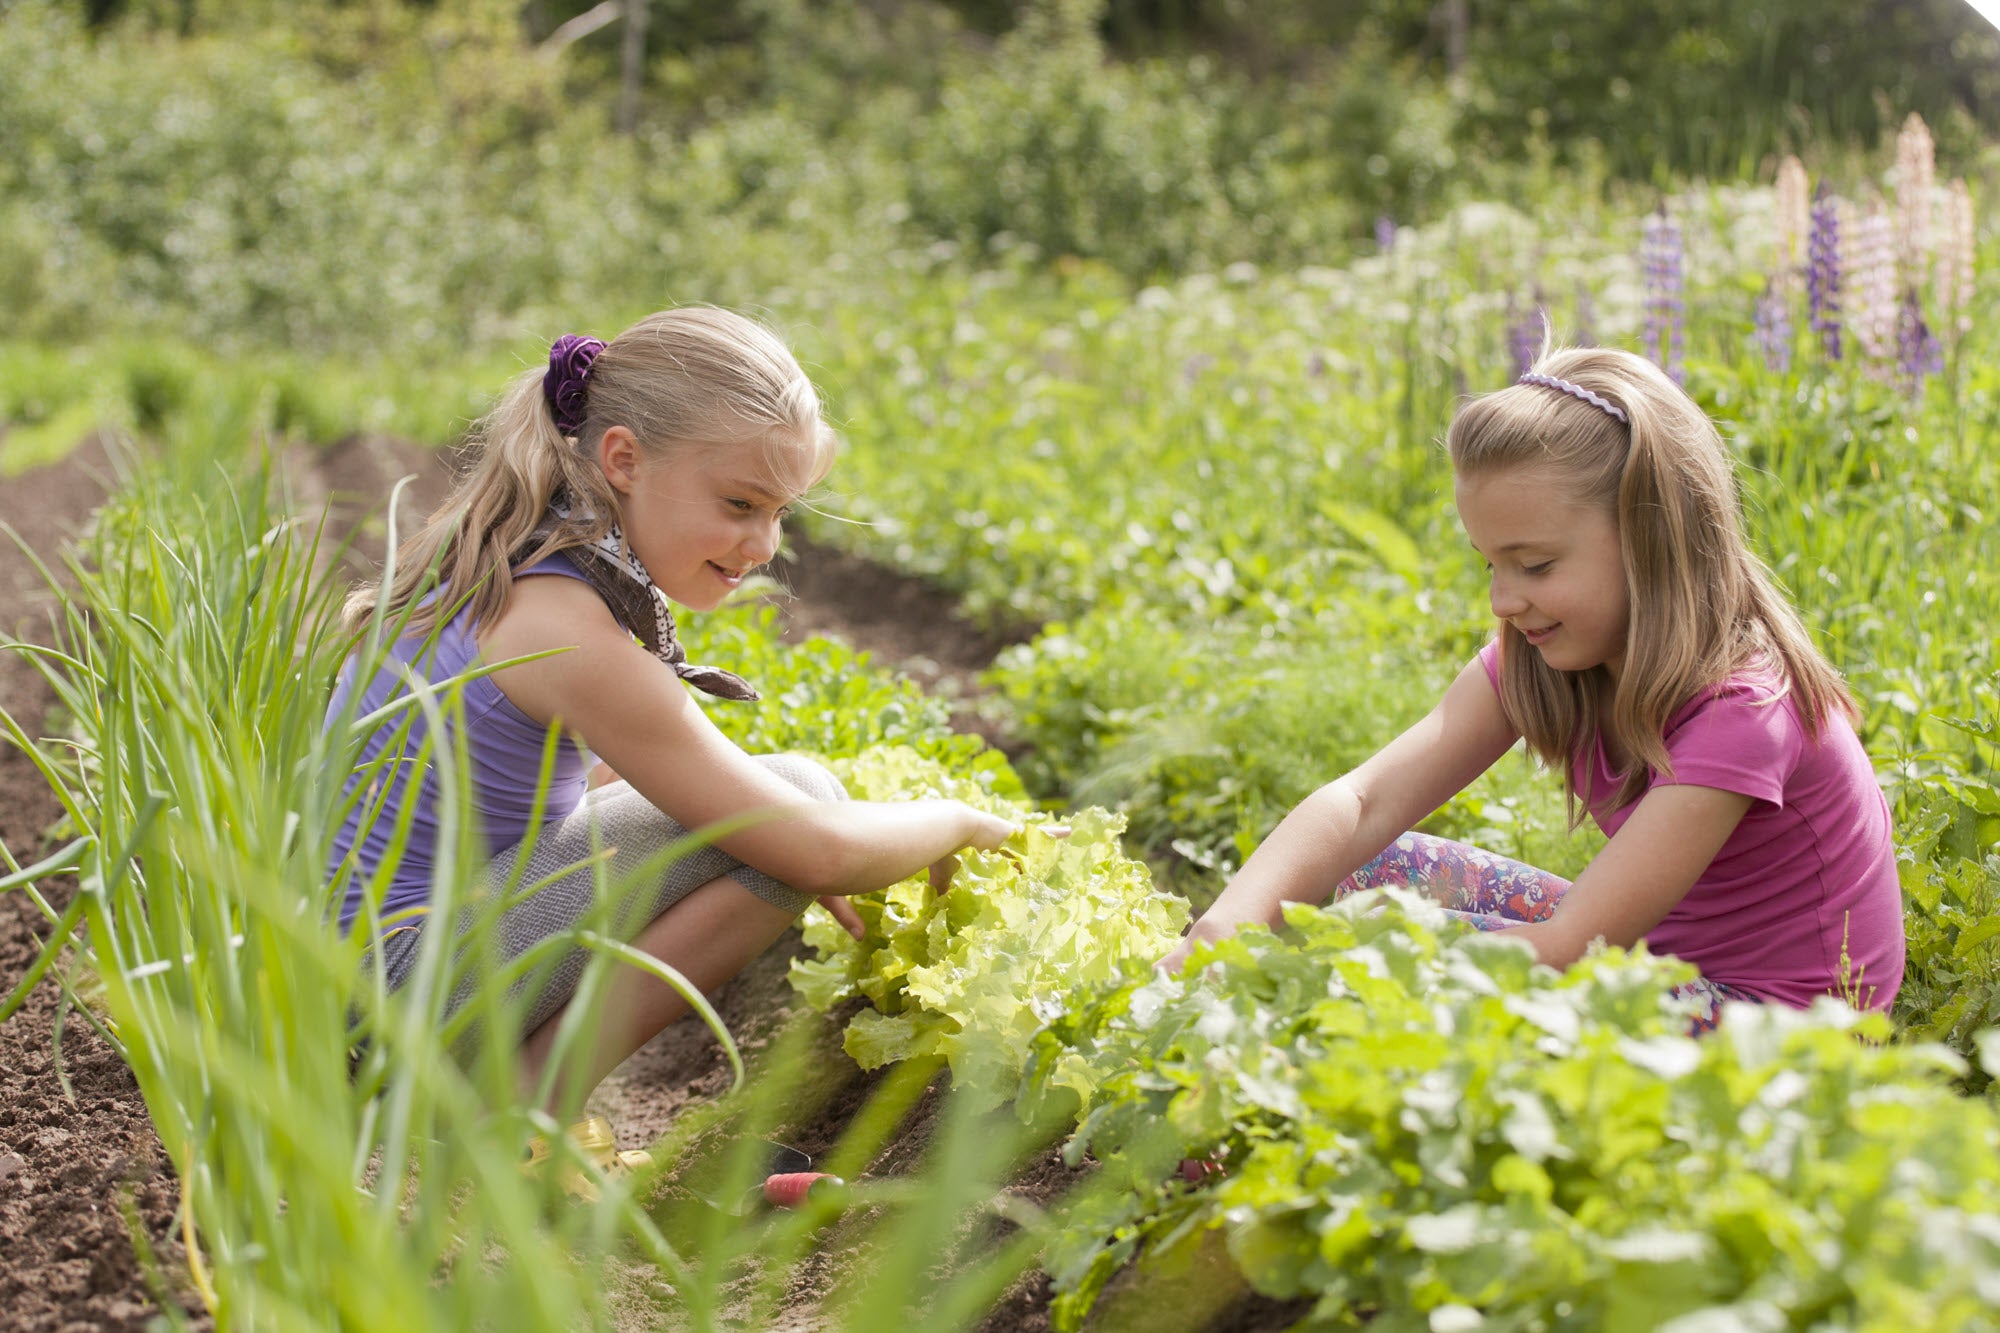 2 young girls are tending to a vegetable garden.